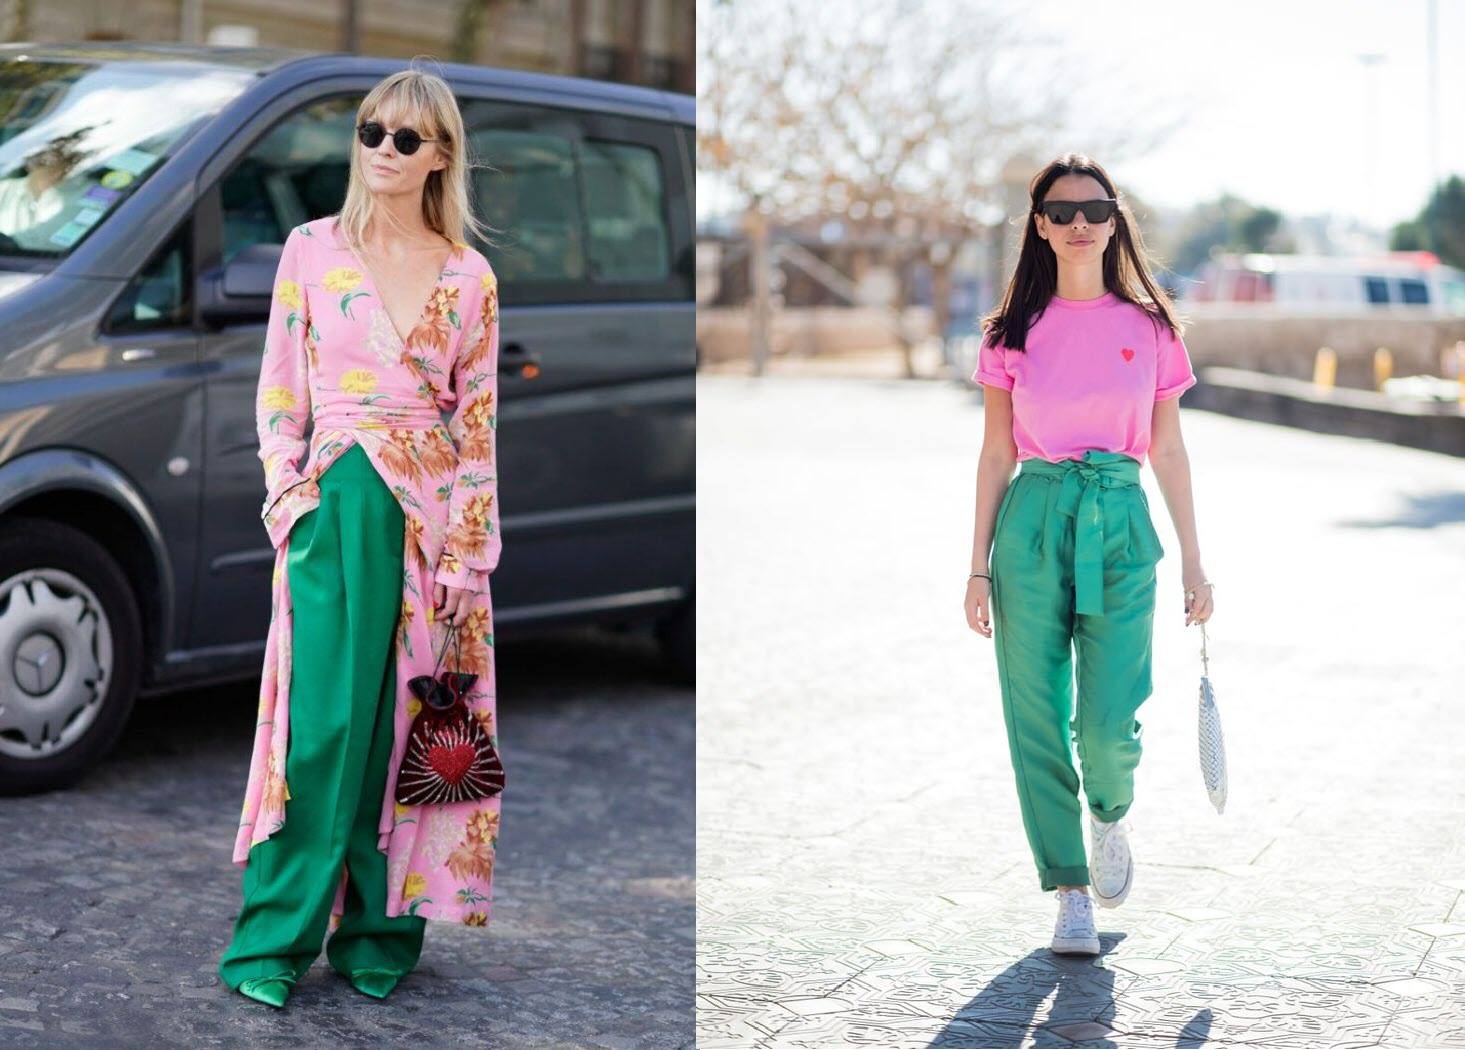 How to Wear Green Pants Like a Fashion Blogger? - Super Easy